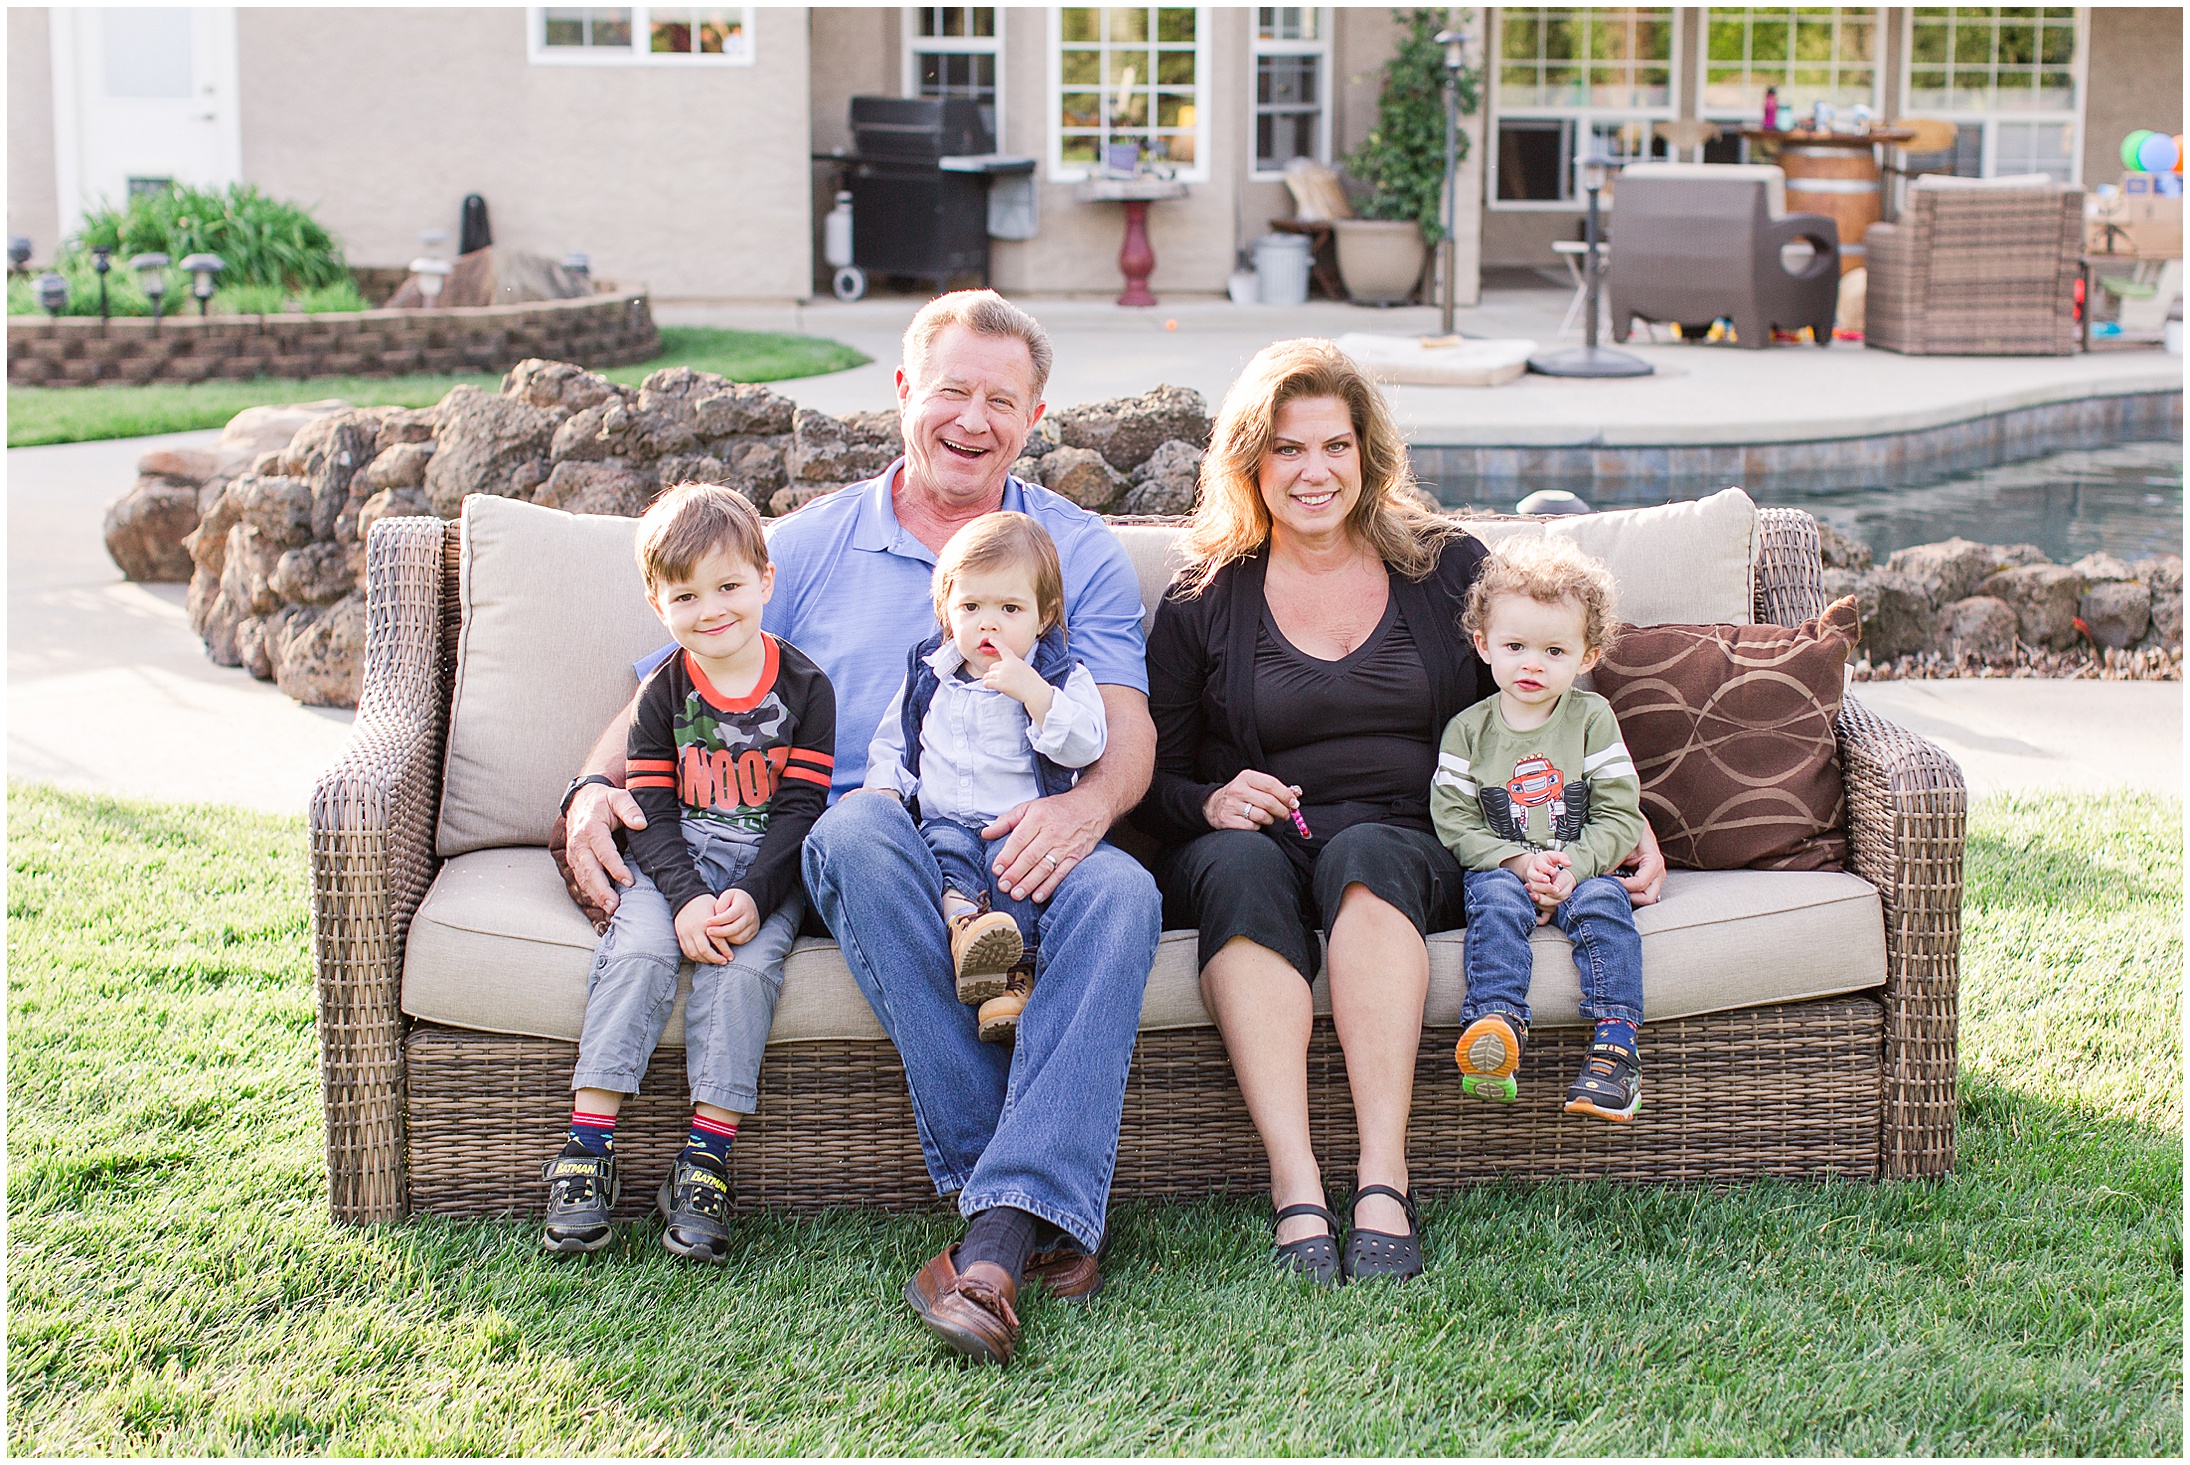 Family on a Bench in the Backyard | Susan + Tim